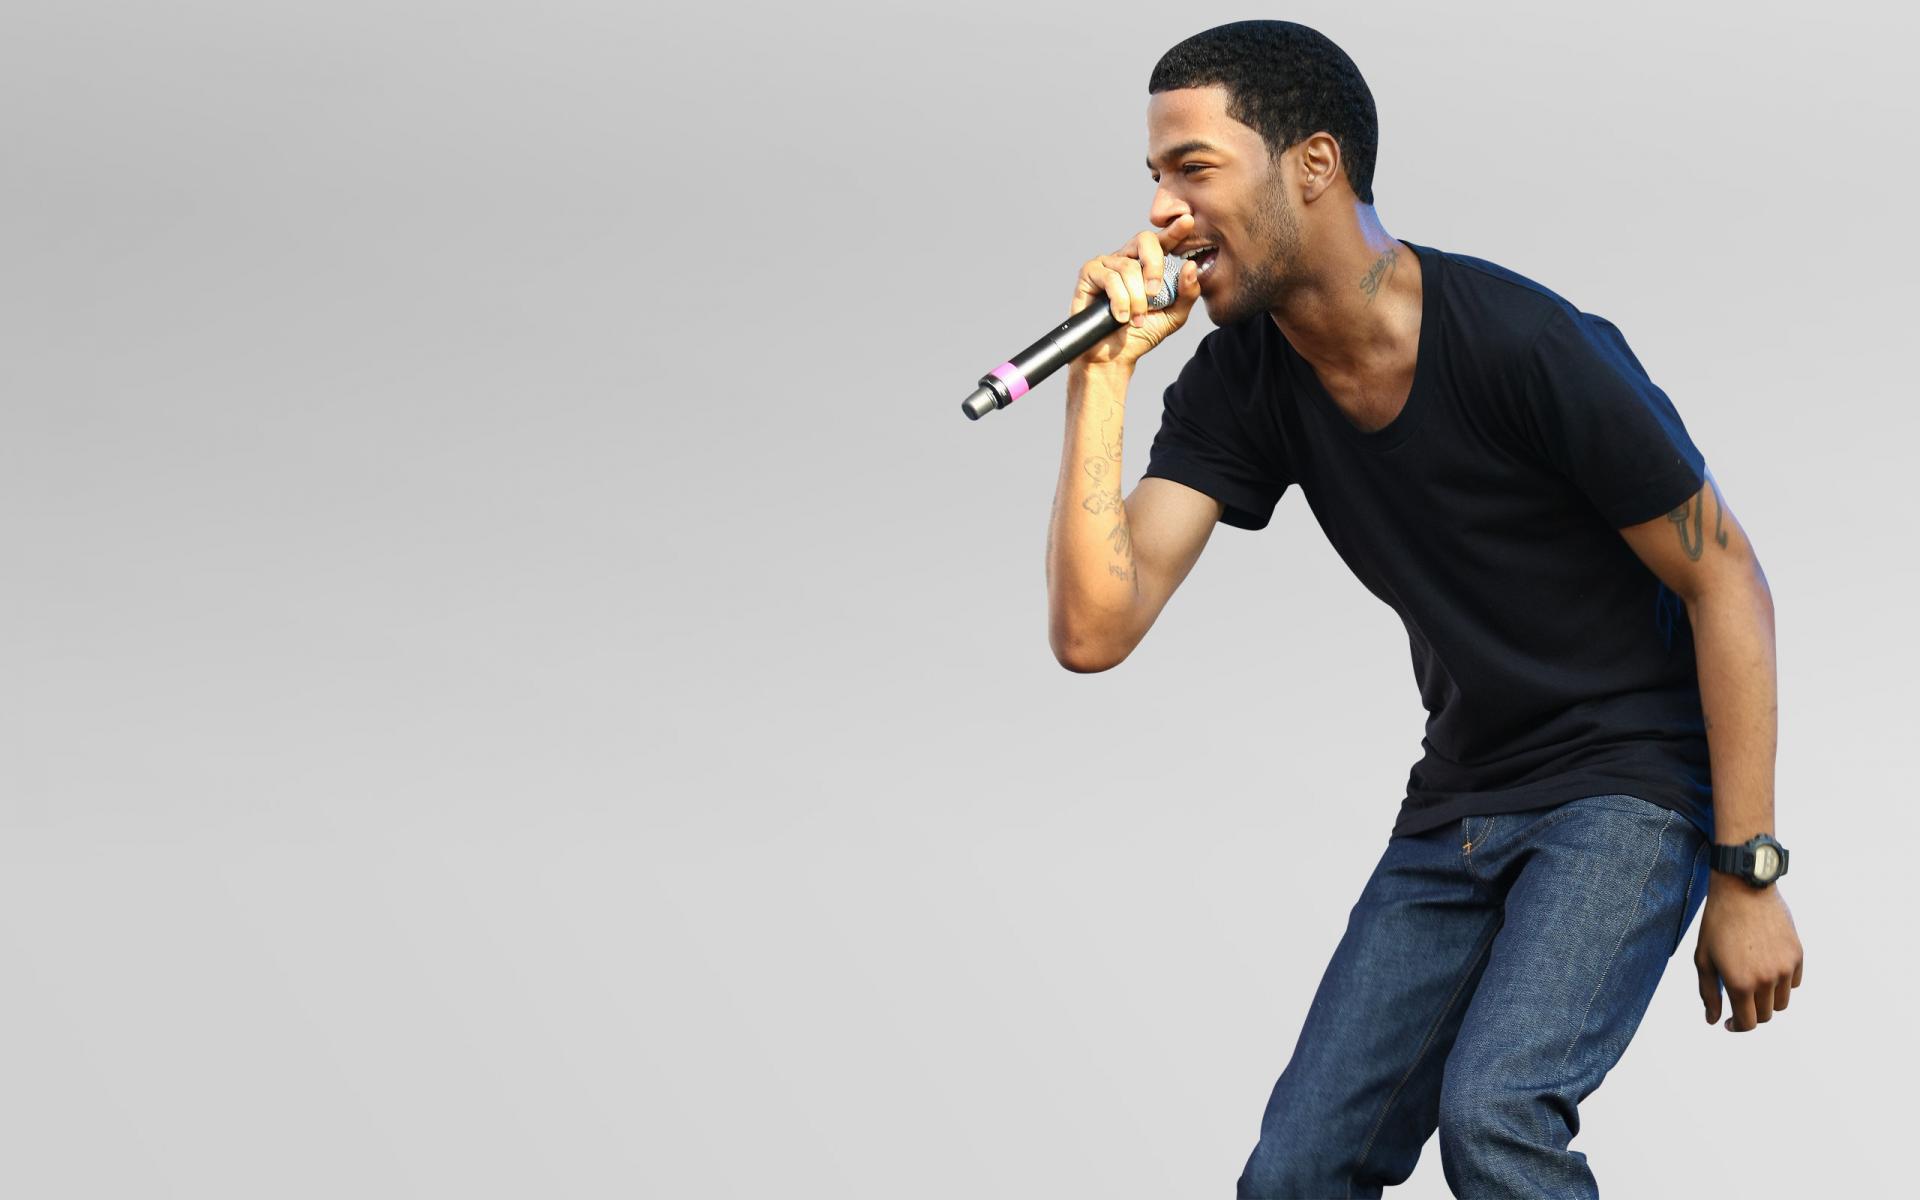 Kid Cudi Wallpaper Image Photo Picture Background